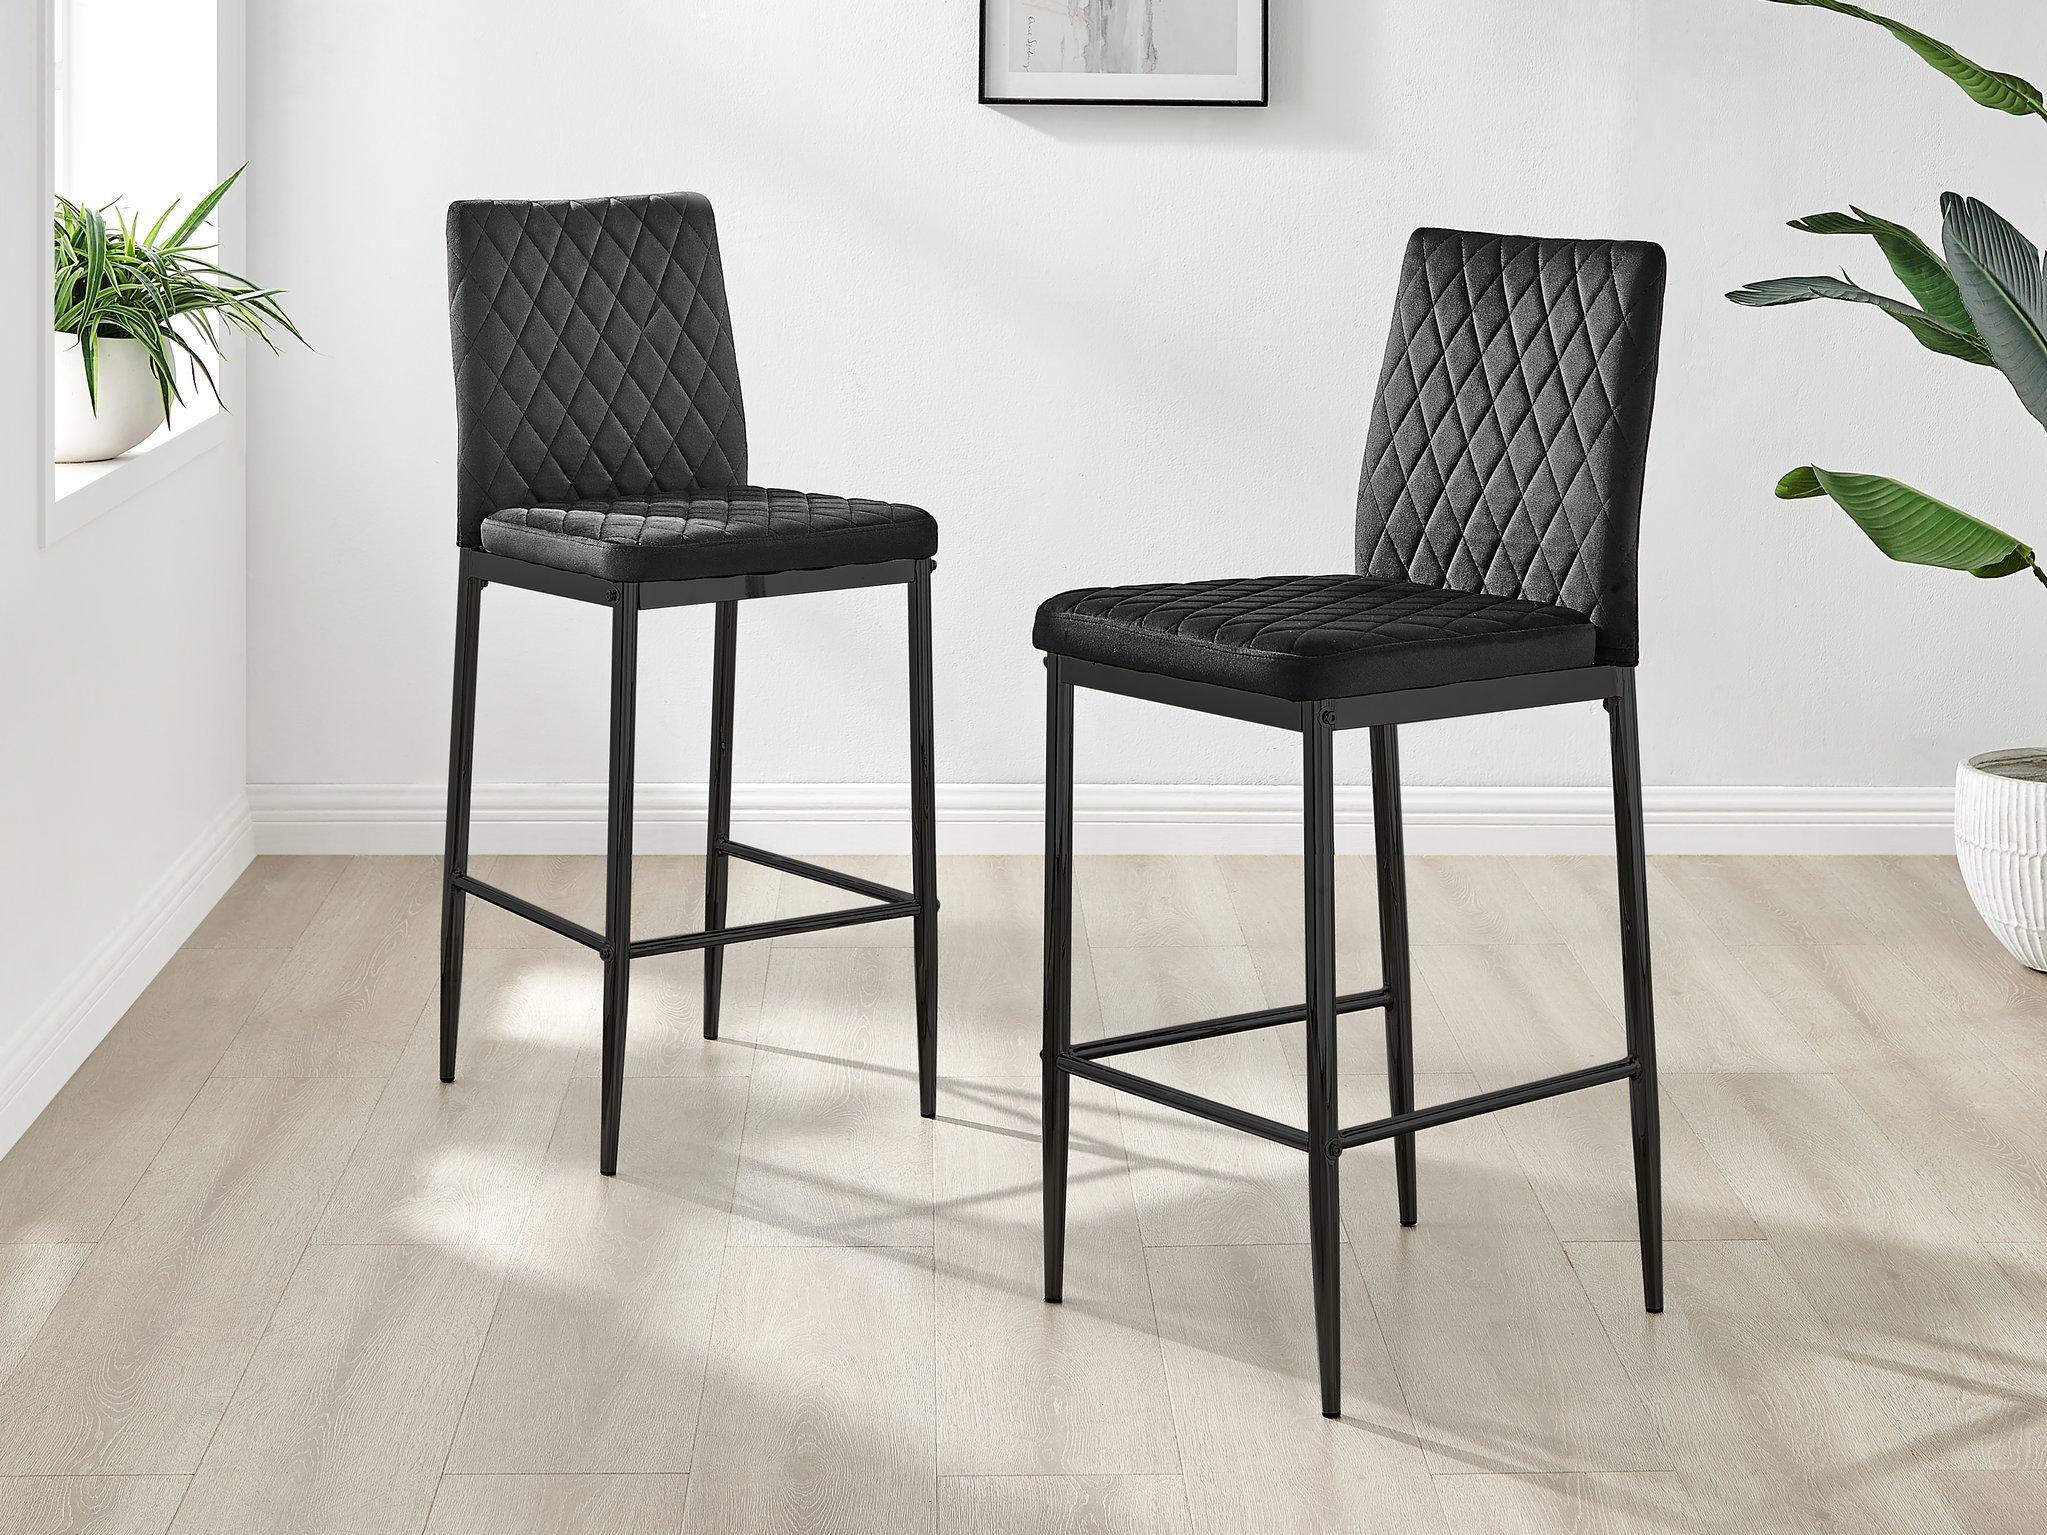 Set of 2 Milan Soft Touch Hatched Velvet Padded Bar Stools With Black Metal Legs